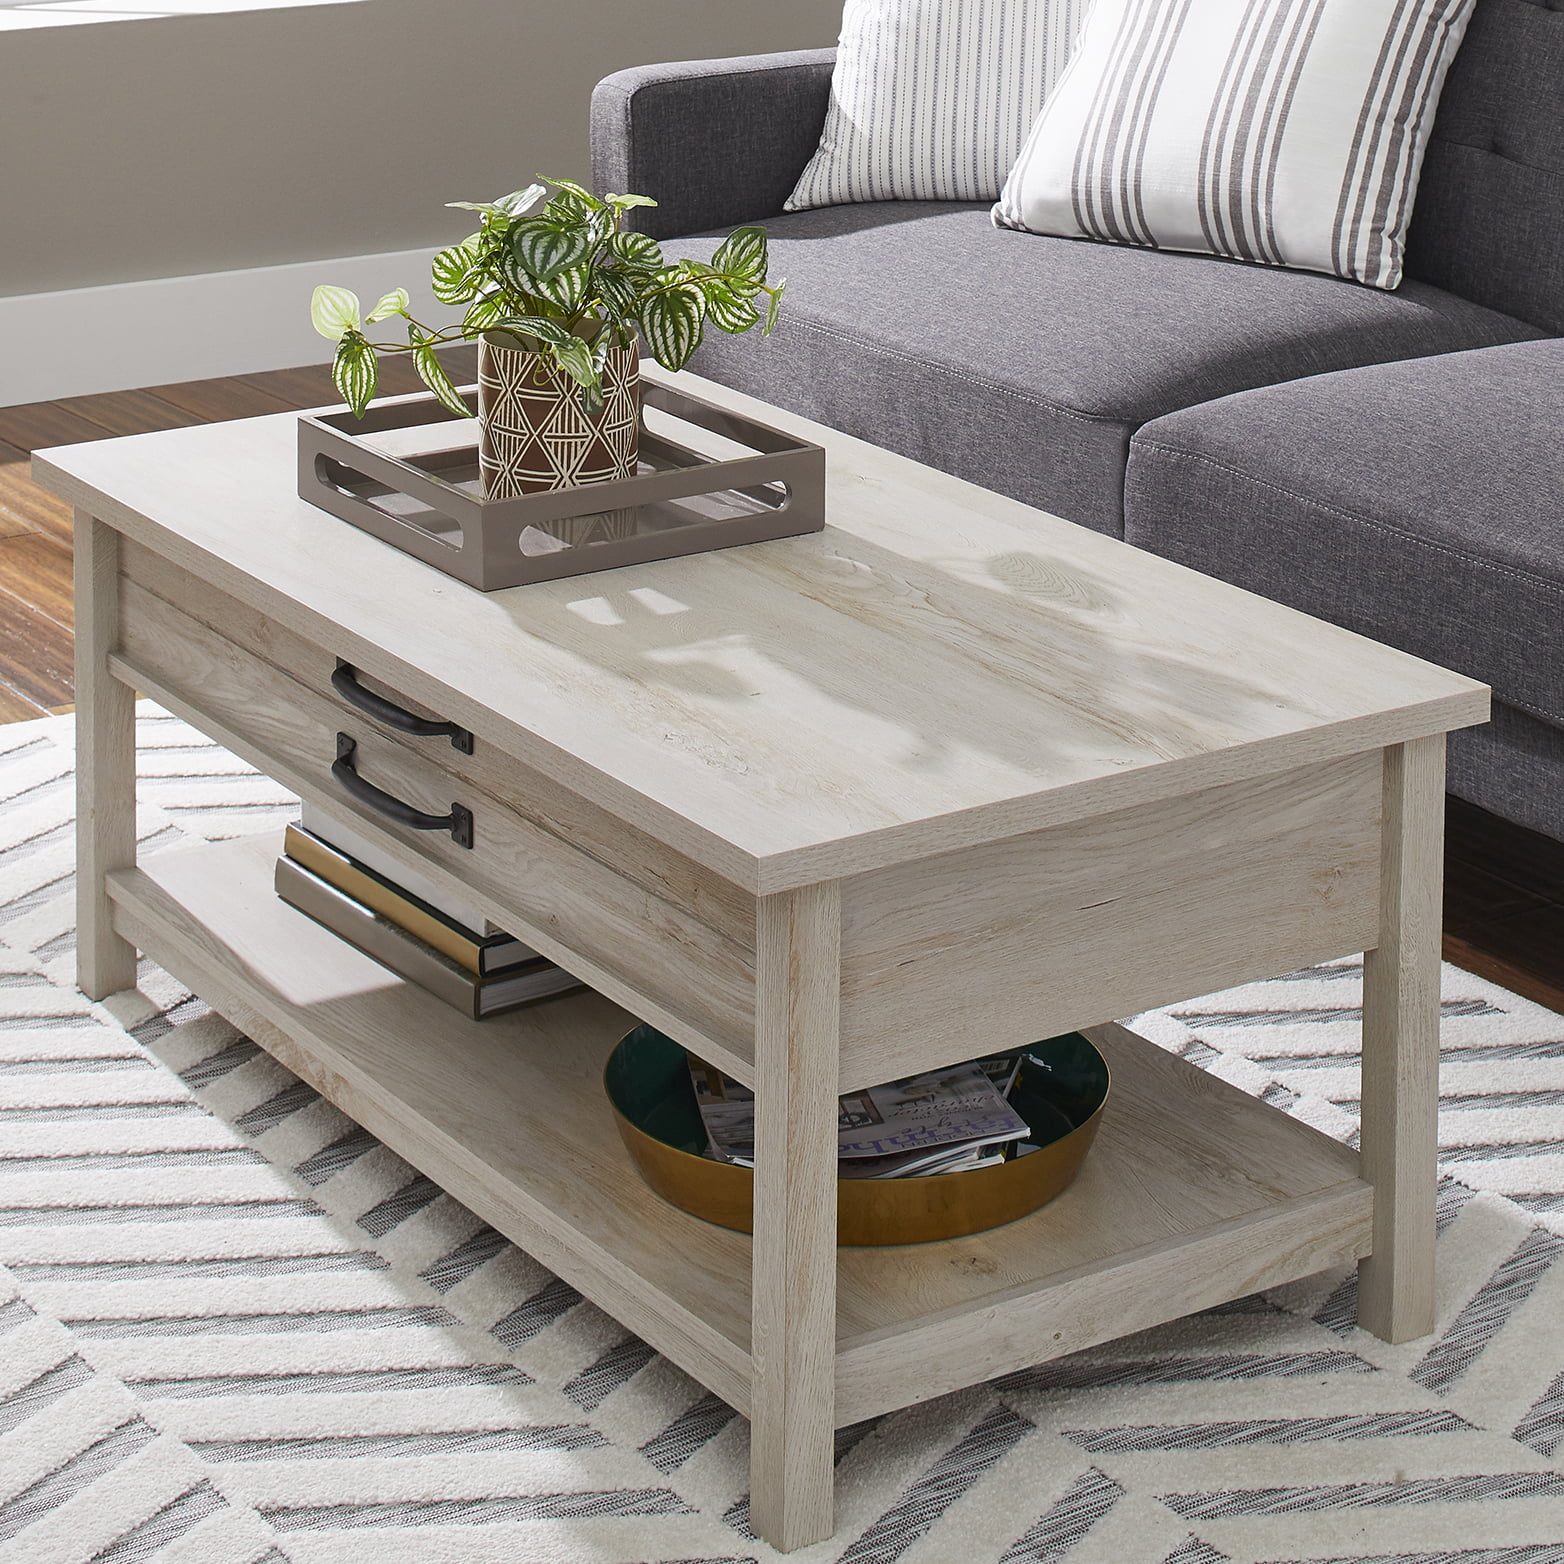 Better Homes & Gardens Modern Farmhouse Rectangle Lift Top Coffee Table - Rustic White or Rustic Gray $129.00